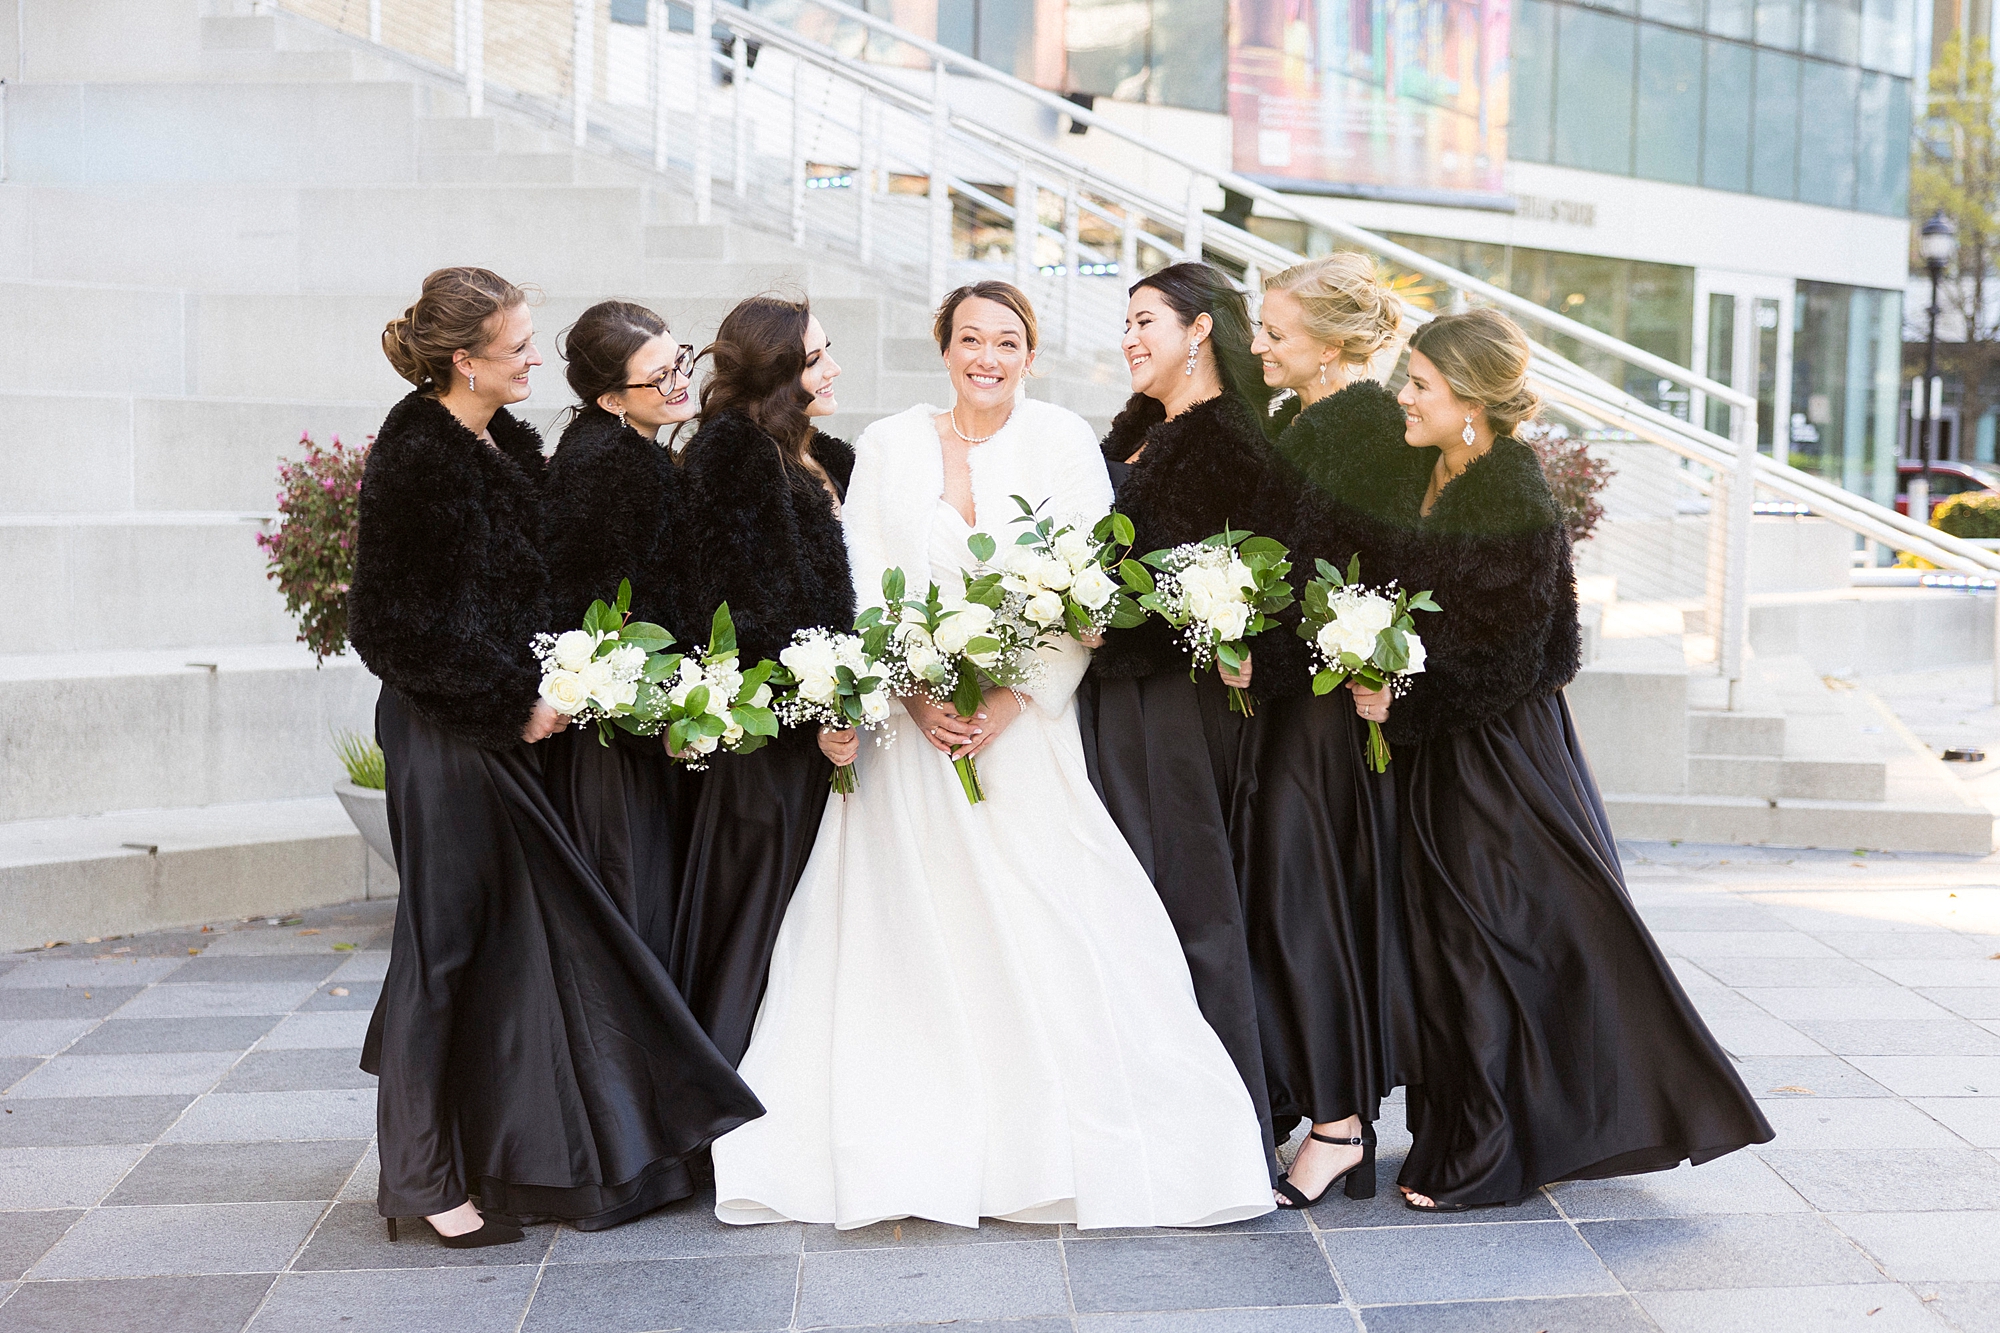 bride smiles with bridesmaids in black dresses and fur wraps